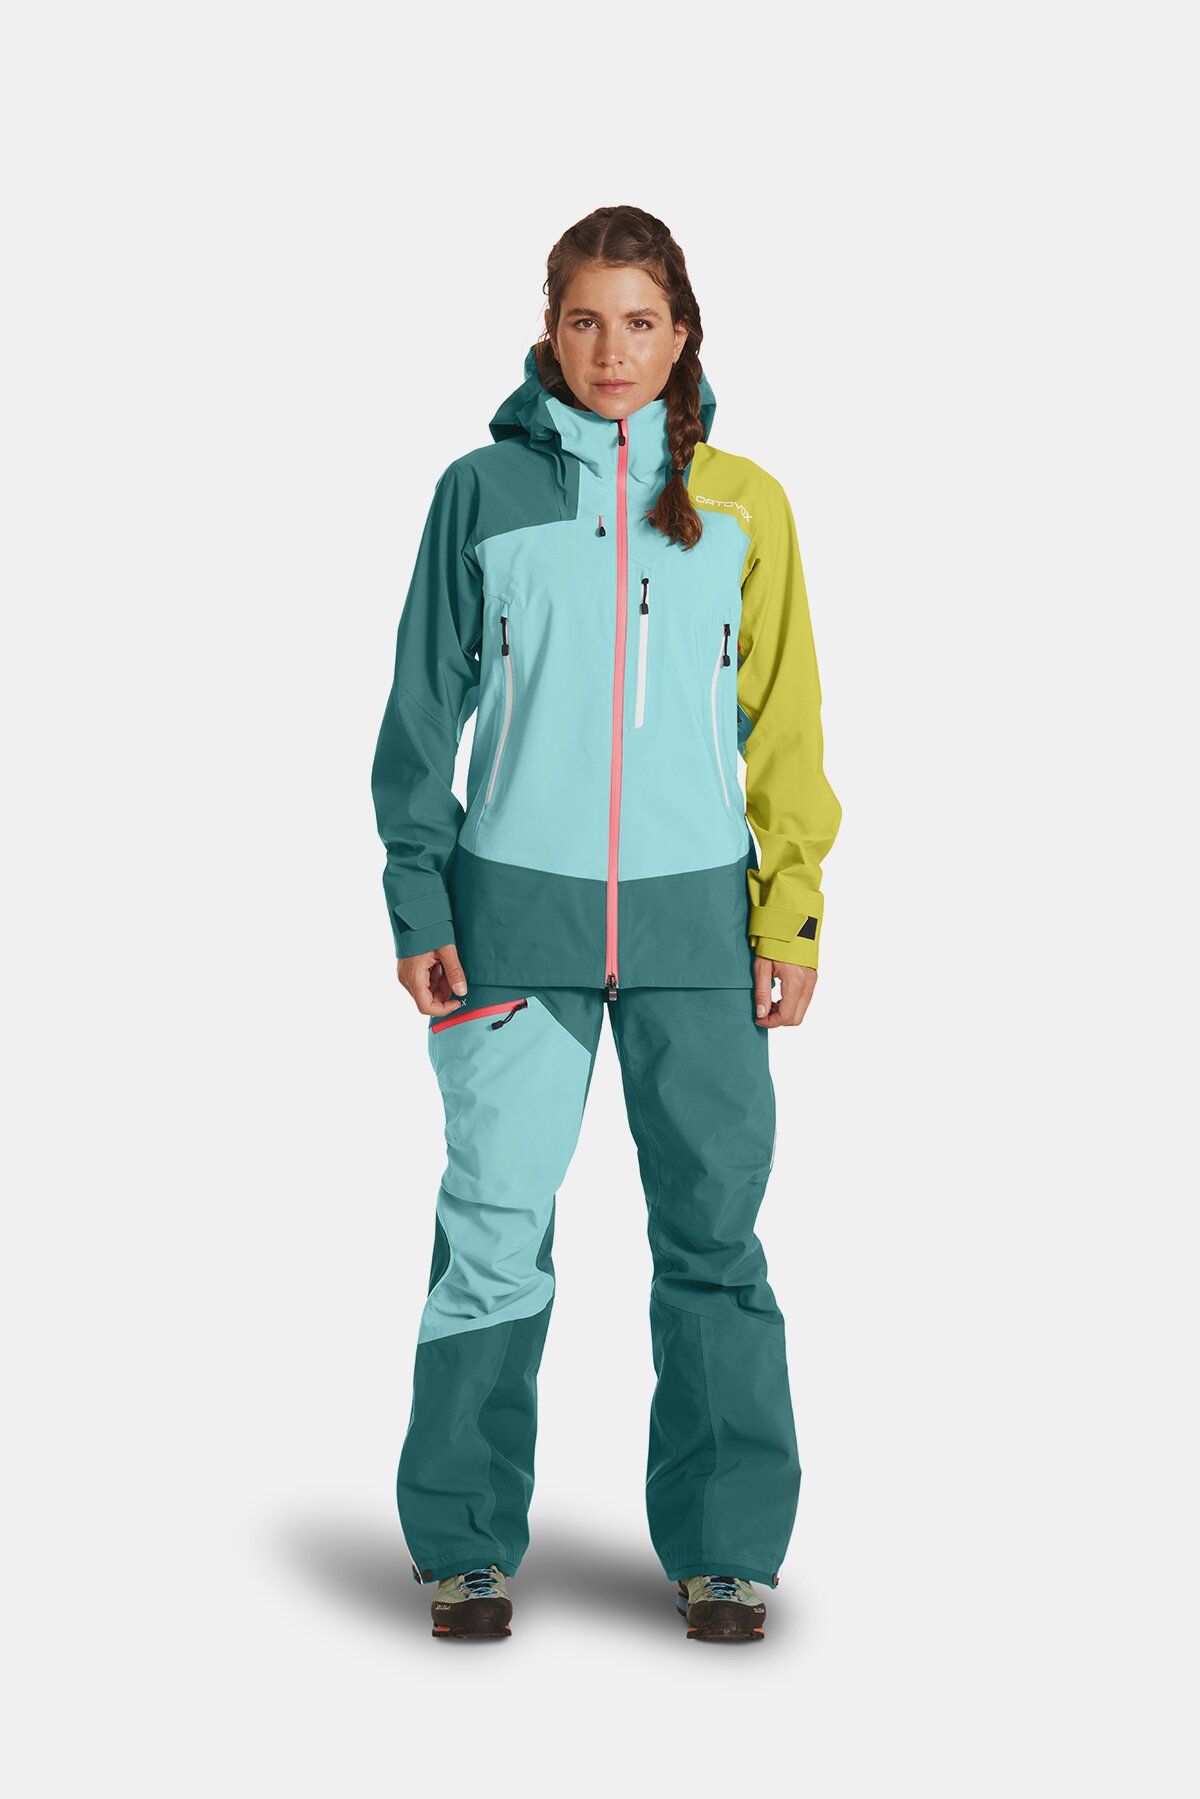 Buy Ortovox Westalpen Softshell Jacket W from £206.22 (Today) – Best Deals  on